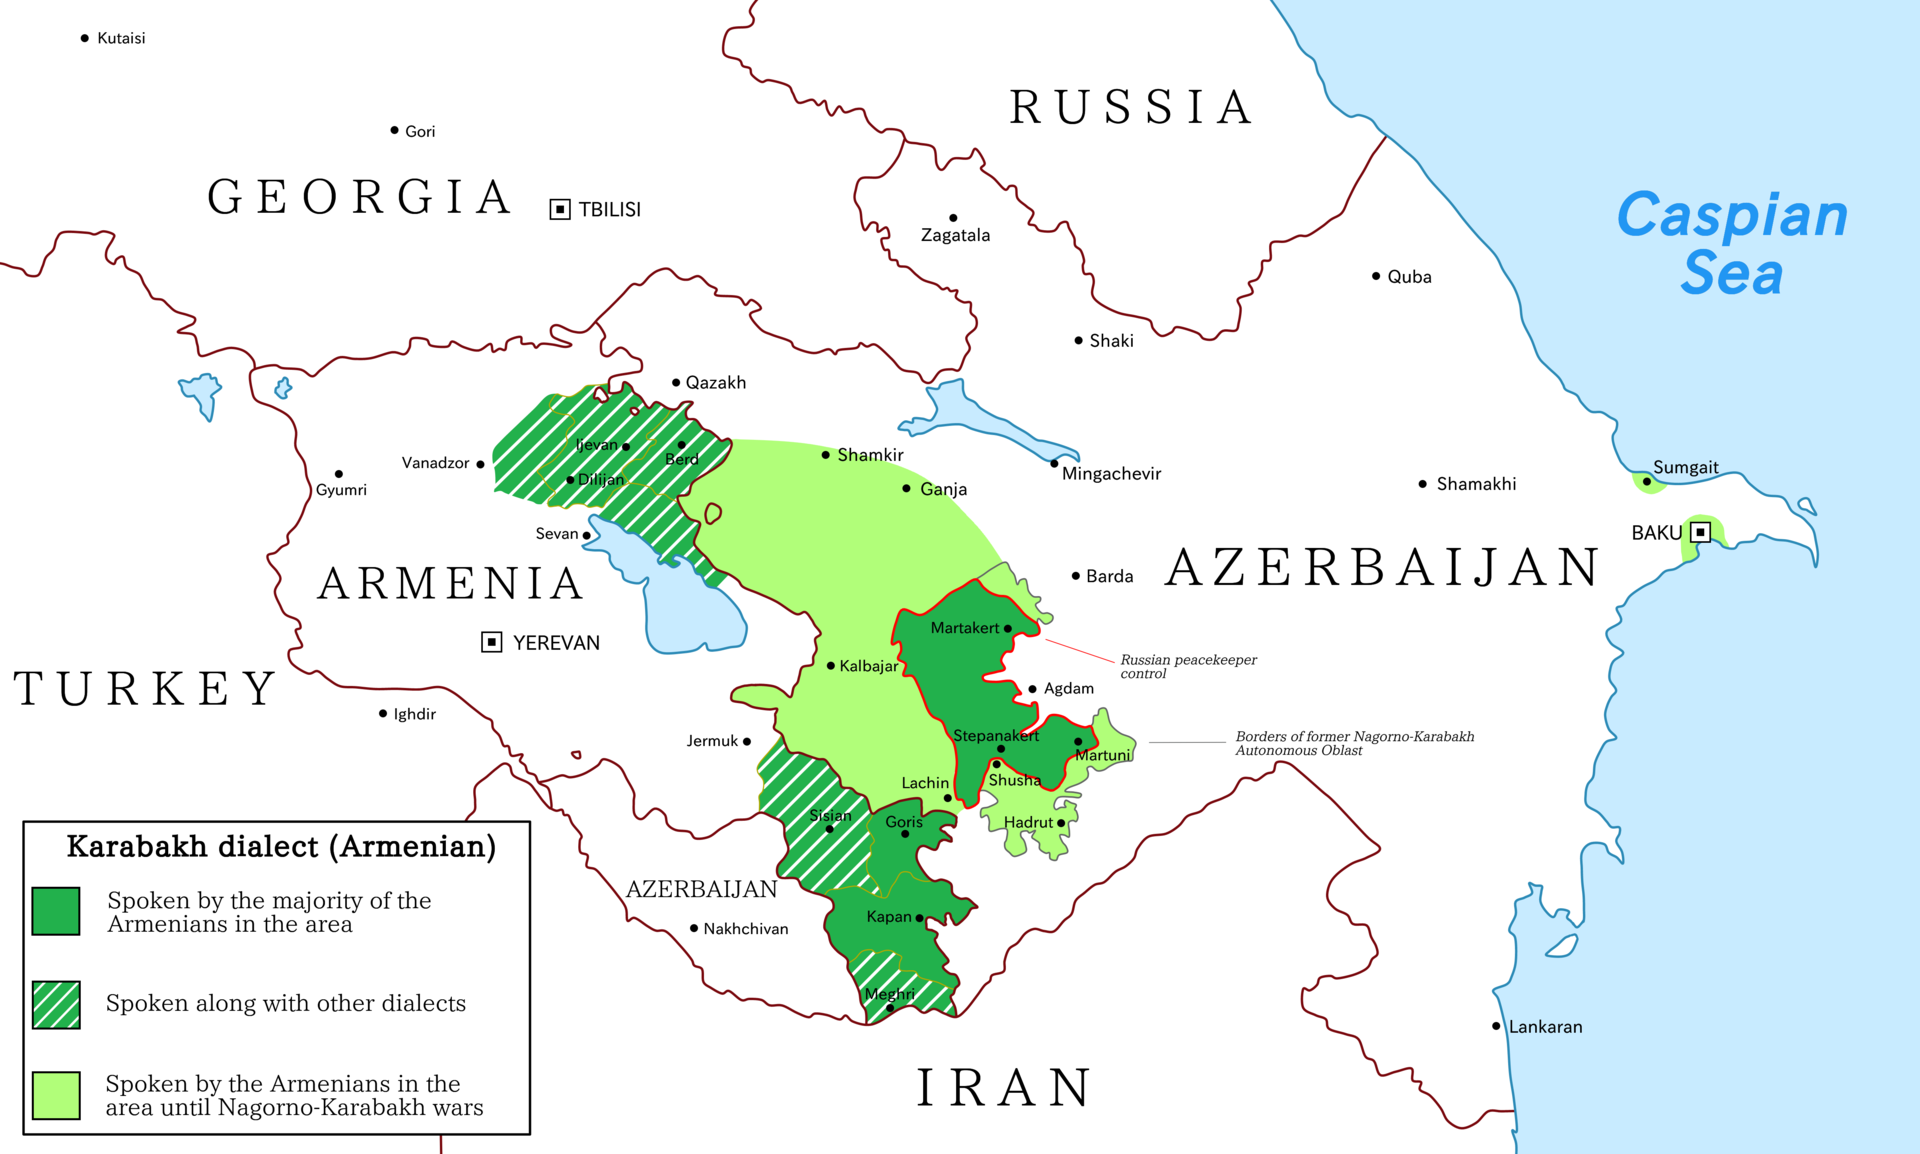 The spread of the Karabakh dialect (Map: Wikimedia Commons)